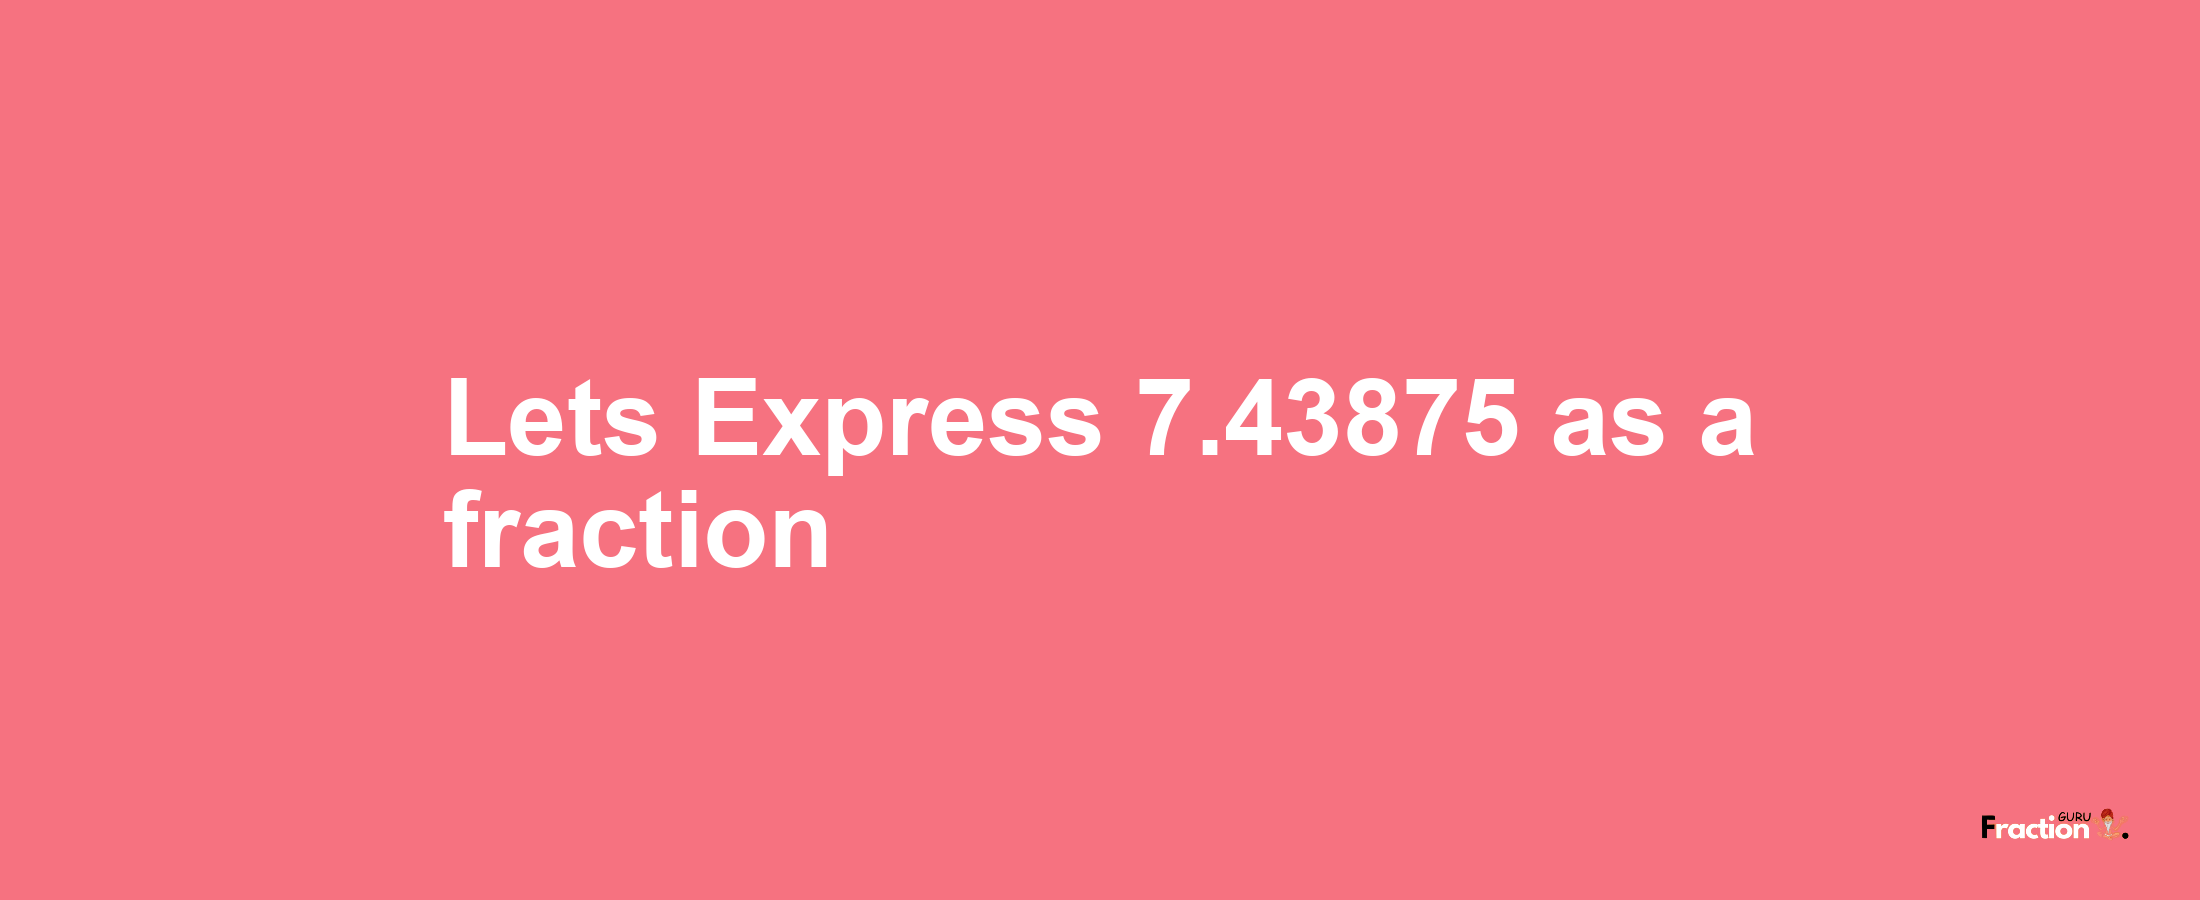 Lets Express 7.43875 as afraction